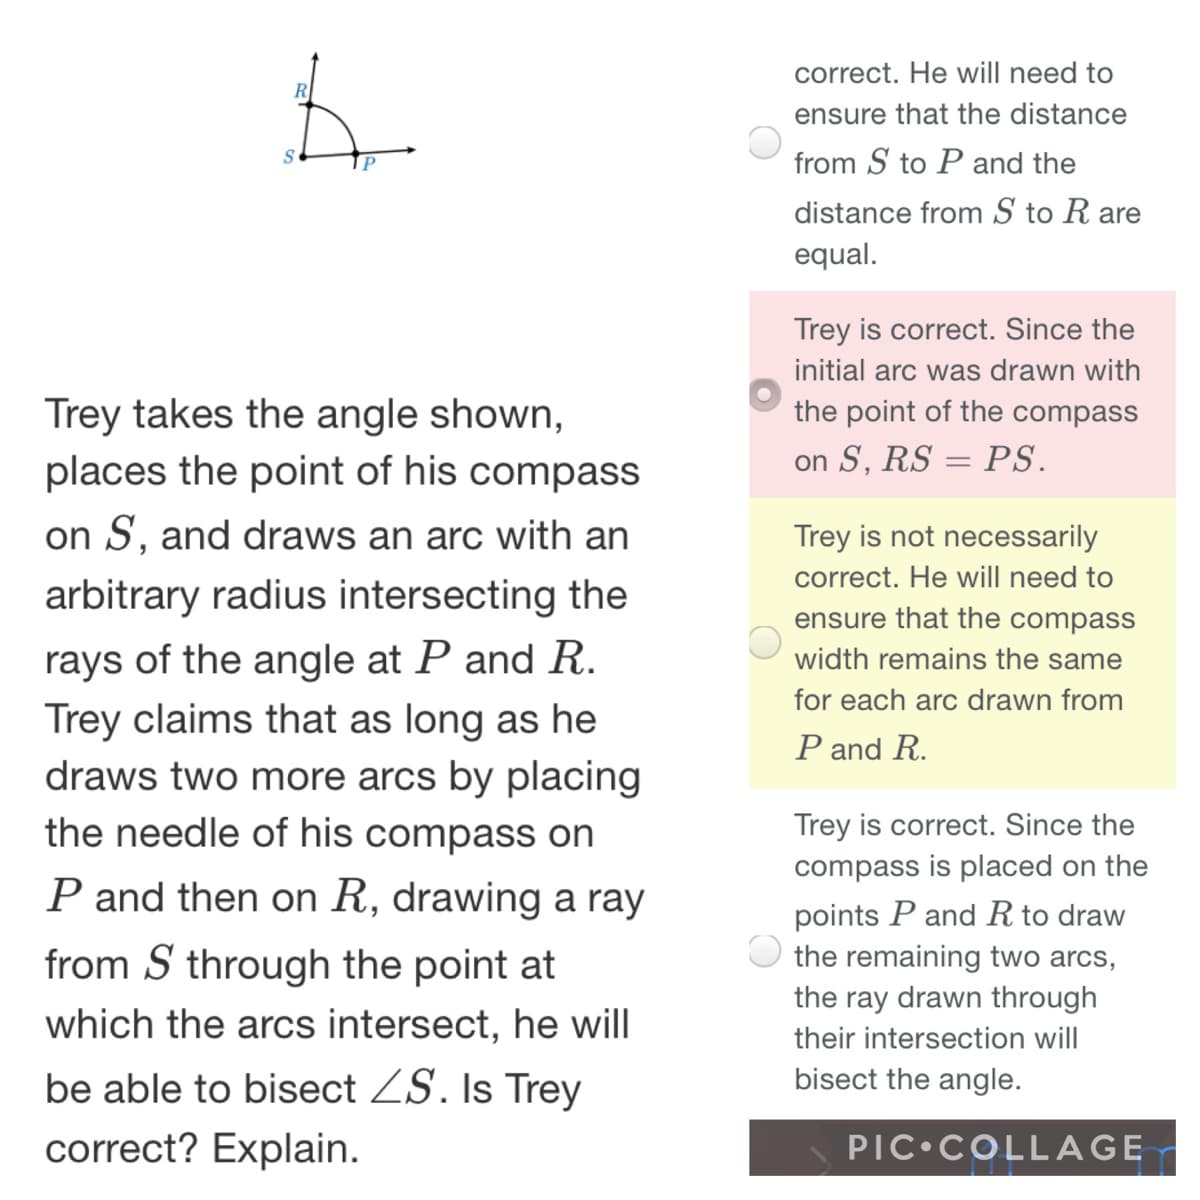 correct. He will need to
ensure that the distance
from S to P and the
distance from S to R are
equal.
Trey is correct. Since the
initial arc was drawn with
the point of the compass
Trey takes the angle shown,
places the point of his compass
on S, RS = PS.
on S, and draws an arc with an
Trey is not necessarily
correct. He will need to
arbitrary radius intersecting the
ensure that the compass
rays of the angle at P and R.
Trey claims that as long as he
draws two more arcs by placing
the needle of his compass on
width remains the same
for each arc drawn from
P and R.
Trey is correct. Since the
compass is placed on the
P and then on R, drawing a ray
points P and R to draw
the remaining two arcs,
from S through the point at
the ray drawn through
which the arcs intersect, he will
their intersection will
be able to bisect ZS. Is Trey
bisect the angle.
correct? Explain.
PIC•COLLAGE
